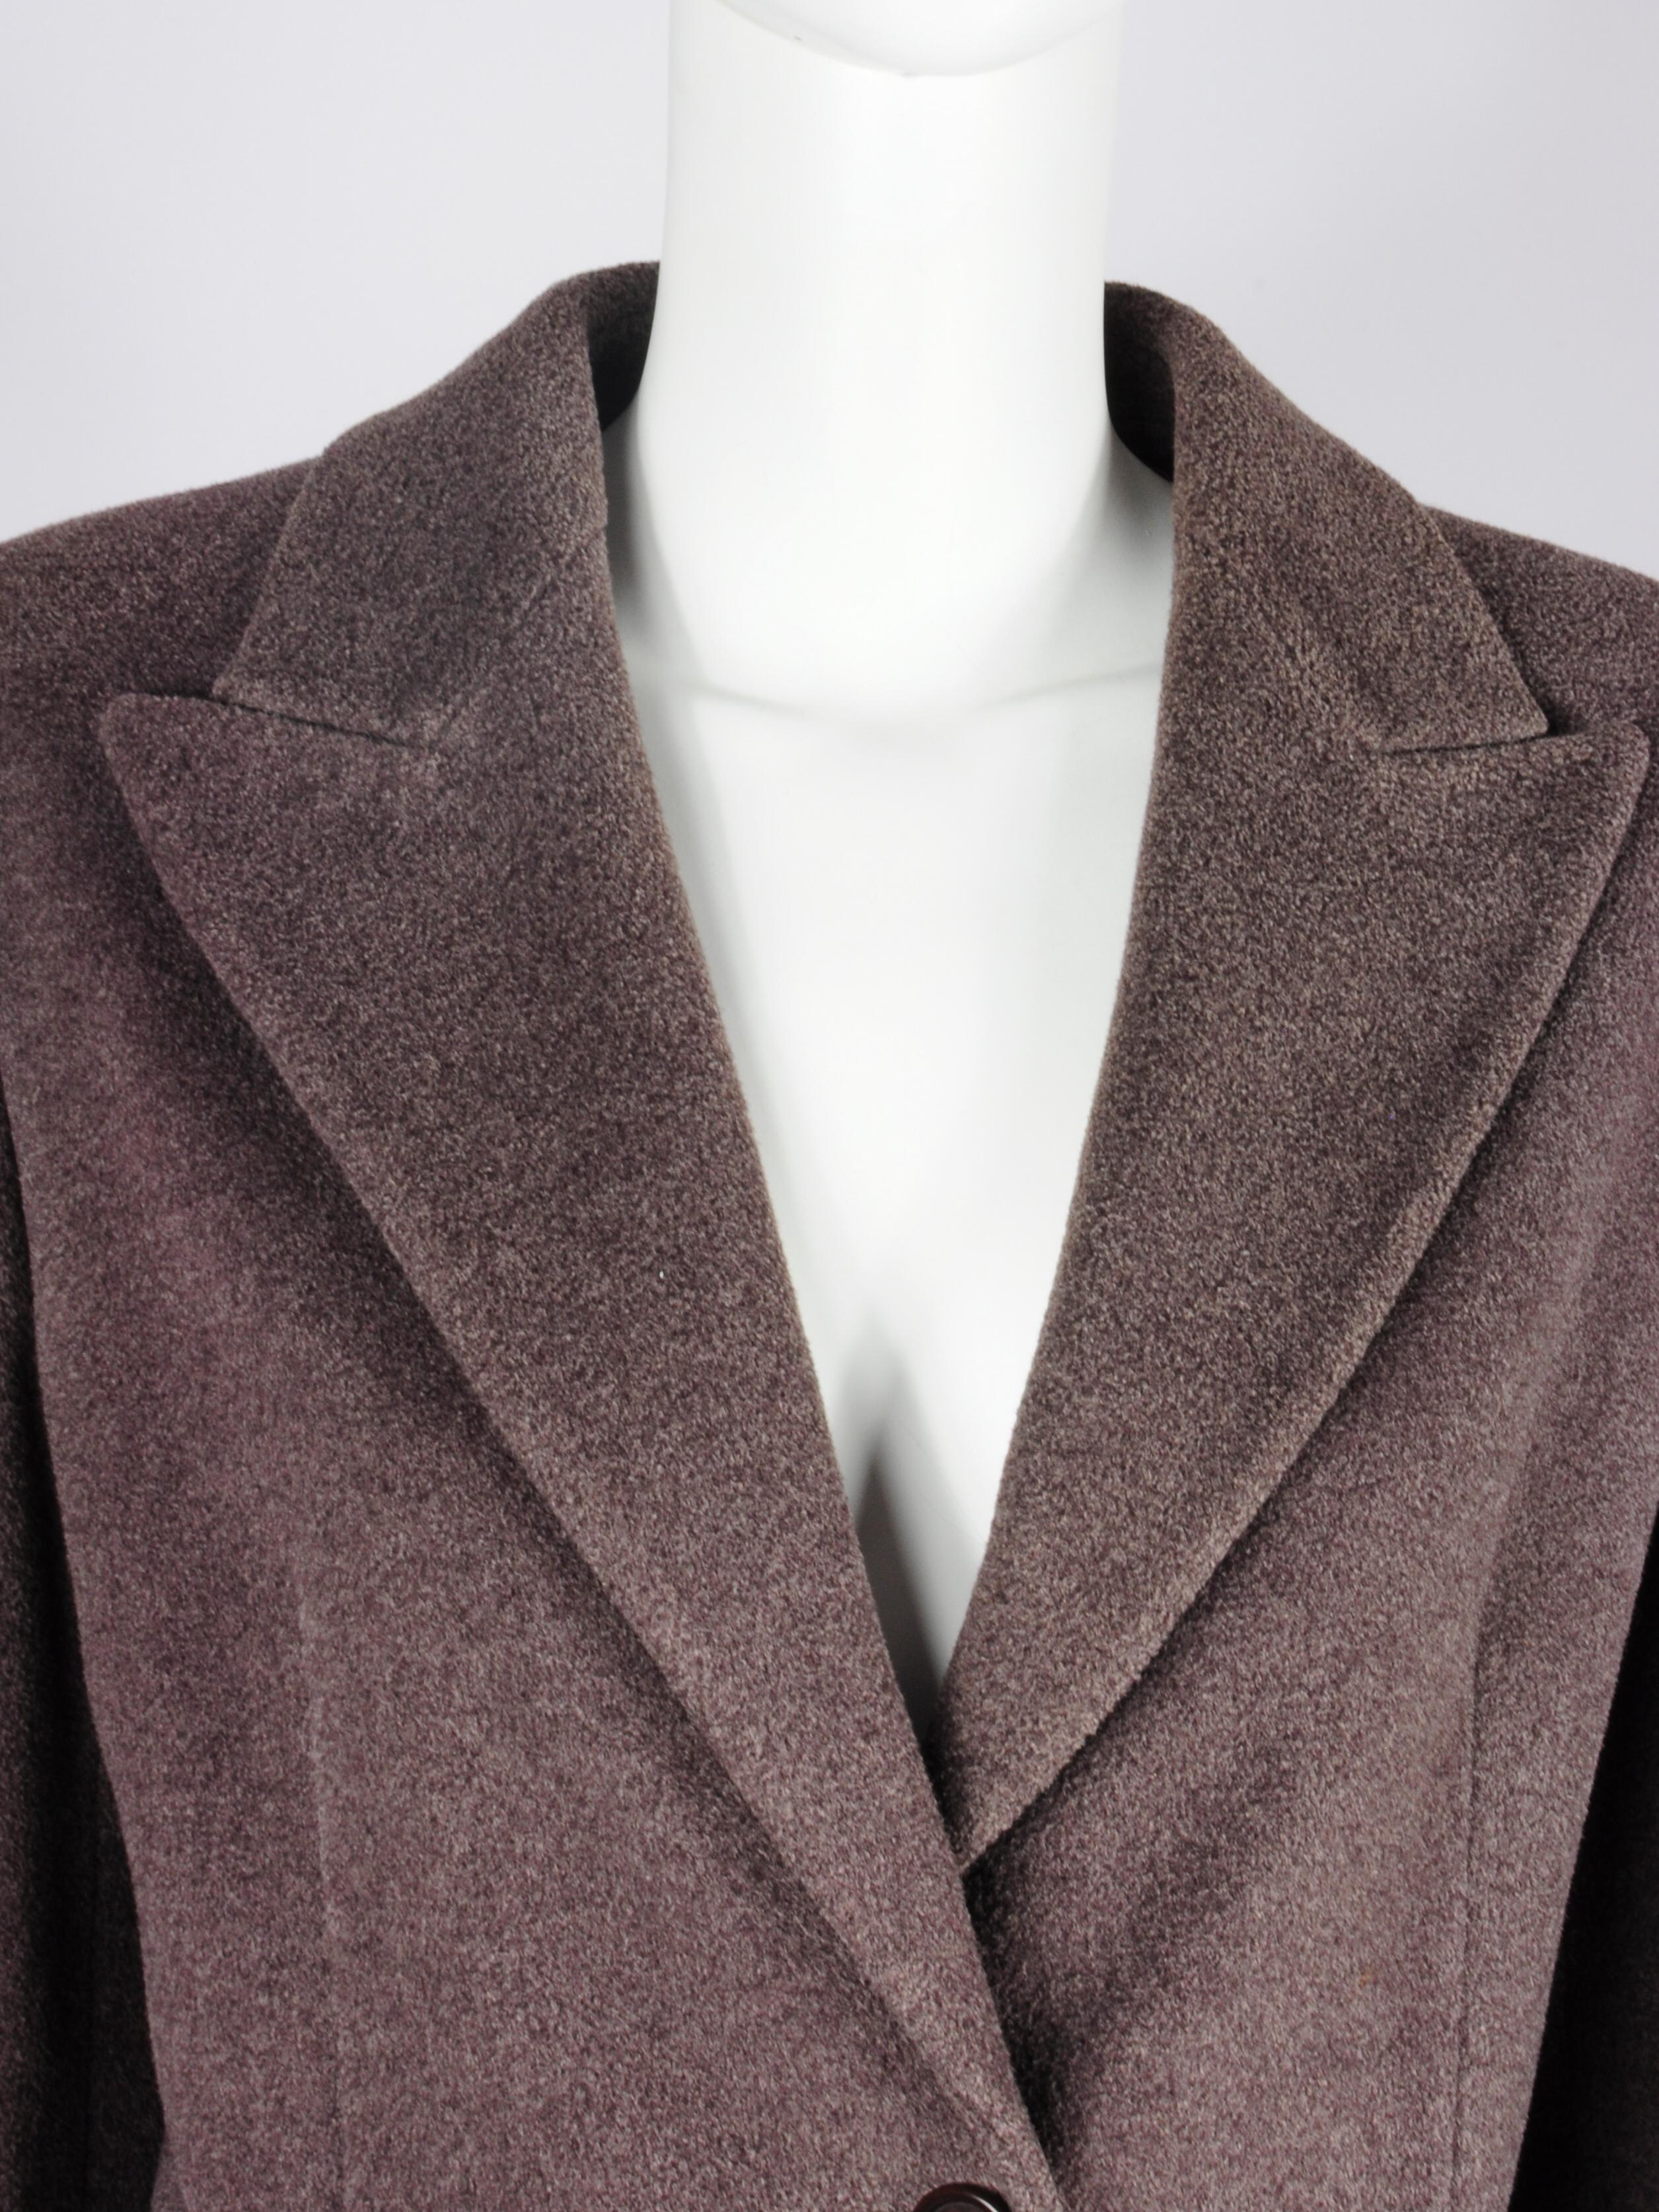 Max Mara Brown Coat Single Breasted Wool and Silk 1990s For Sale 4